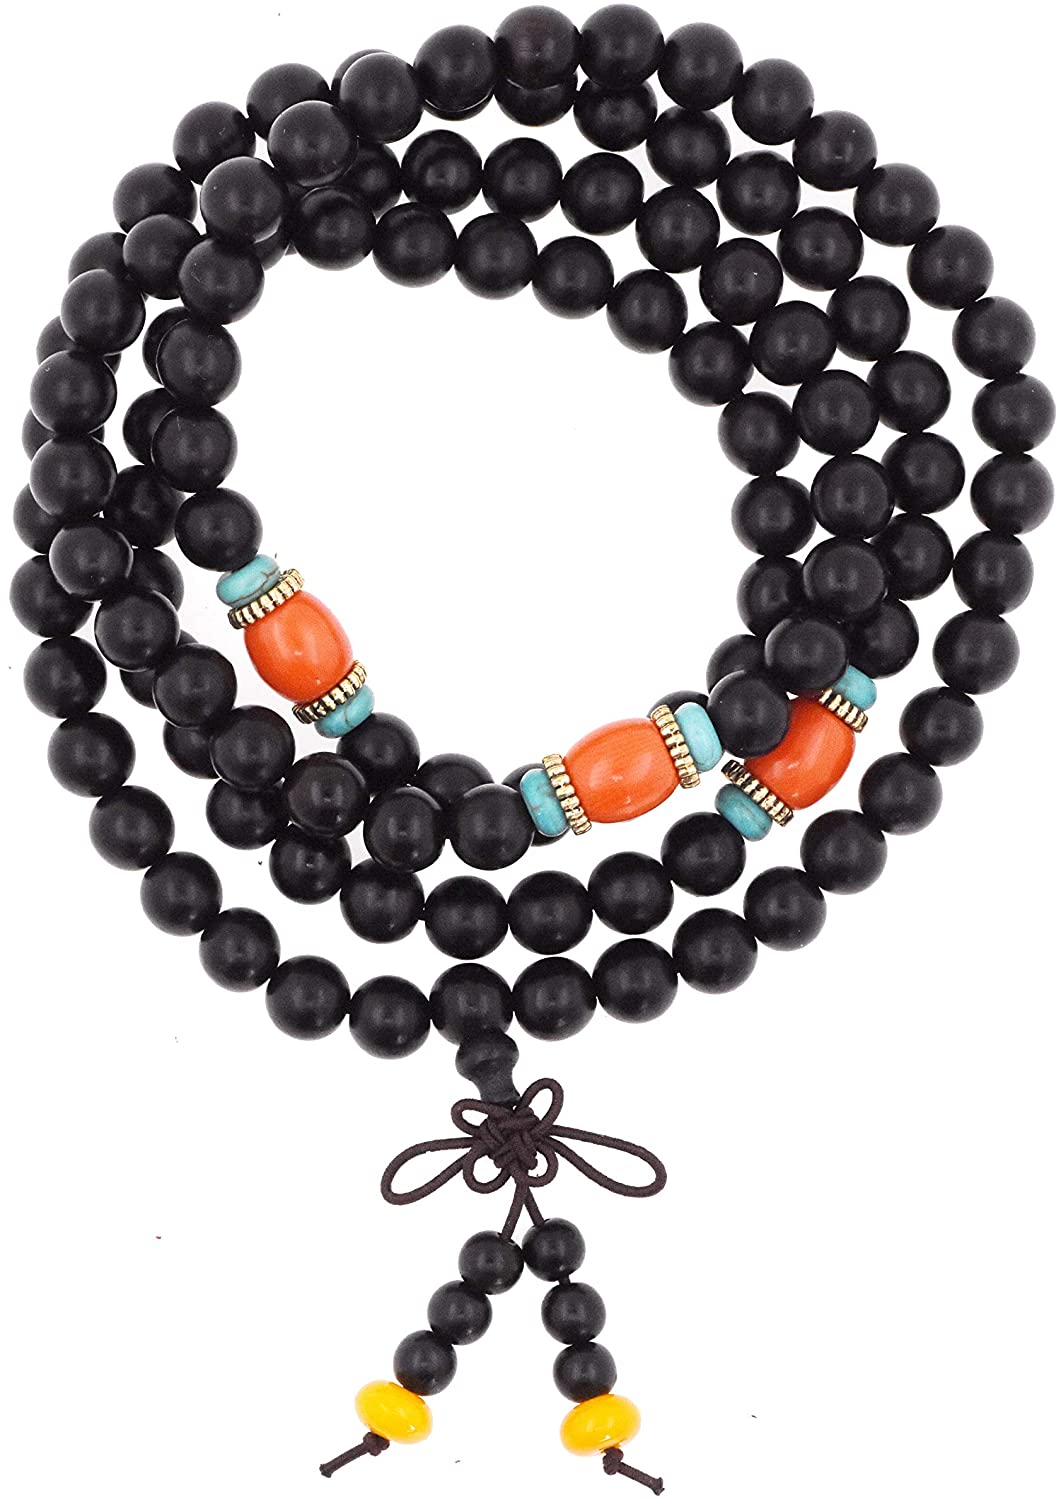 Mala Beads Importance For Meditation and Types